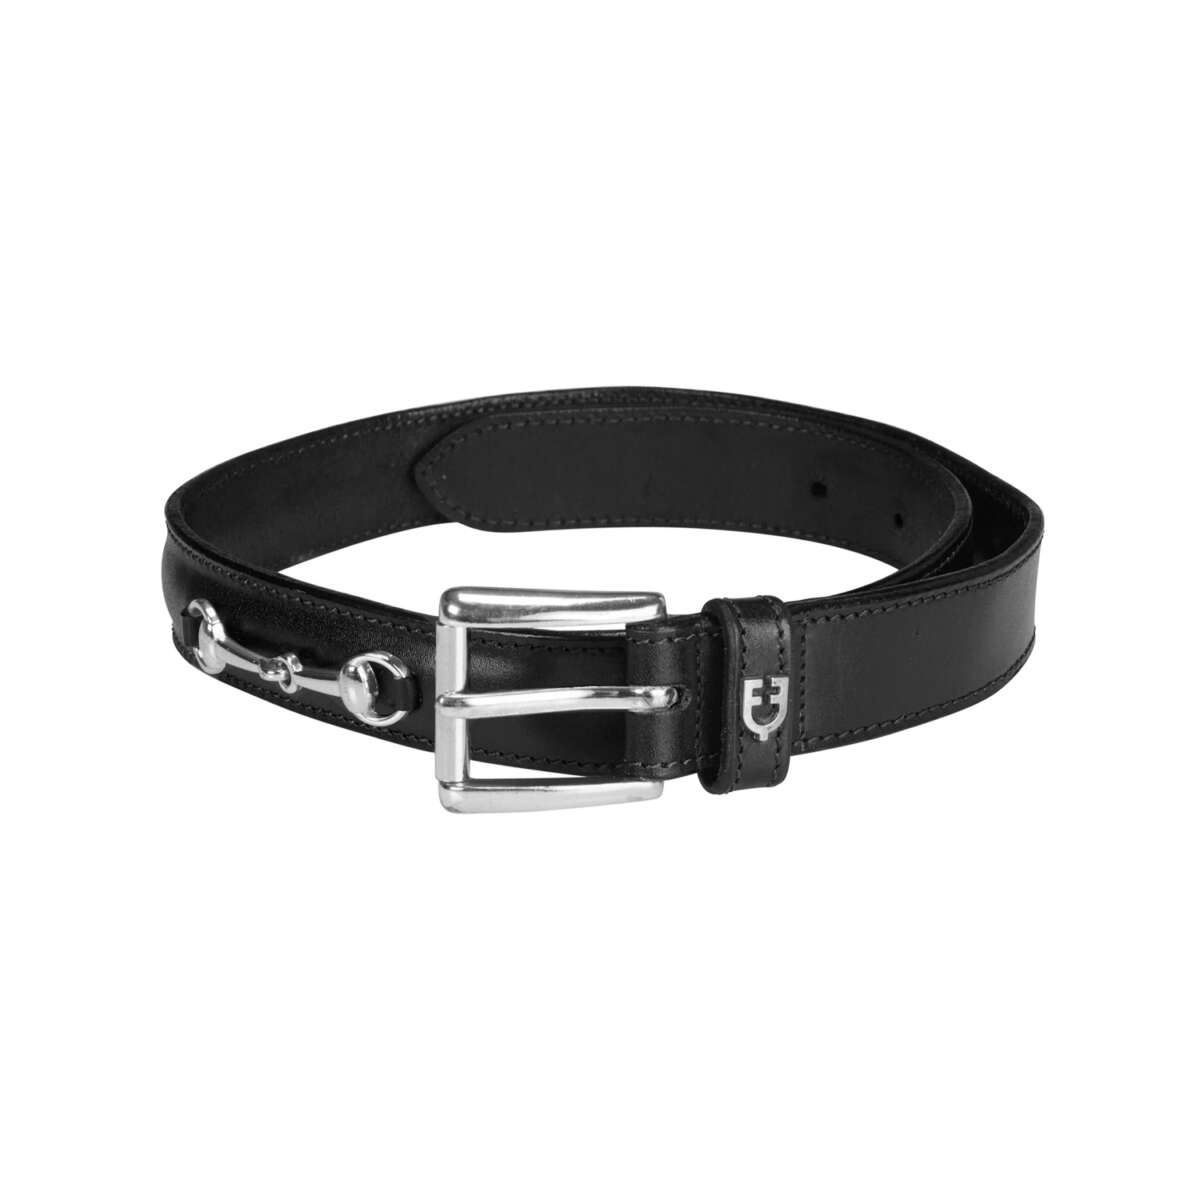 0039207_leather-belt-with-snaffle-bits_ab00611